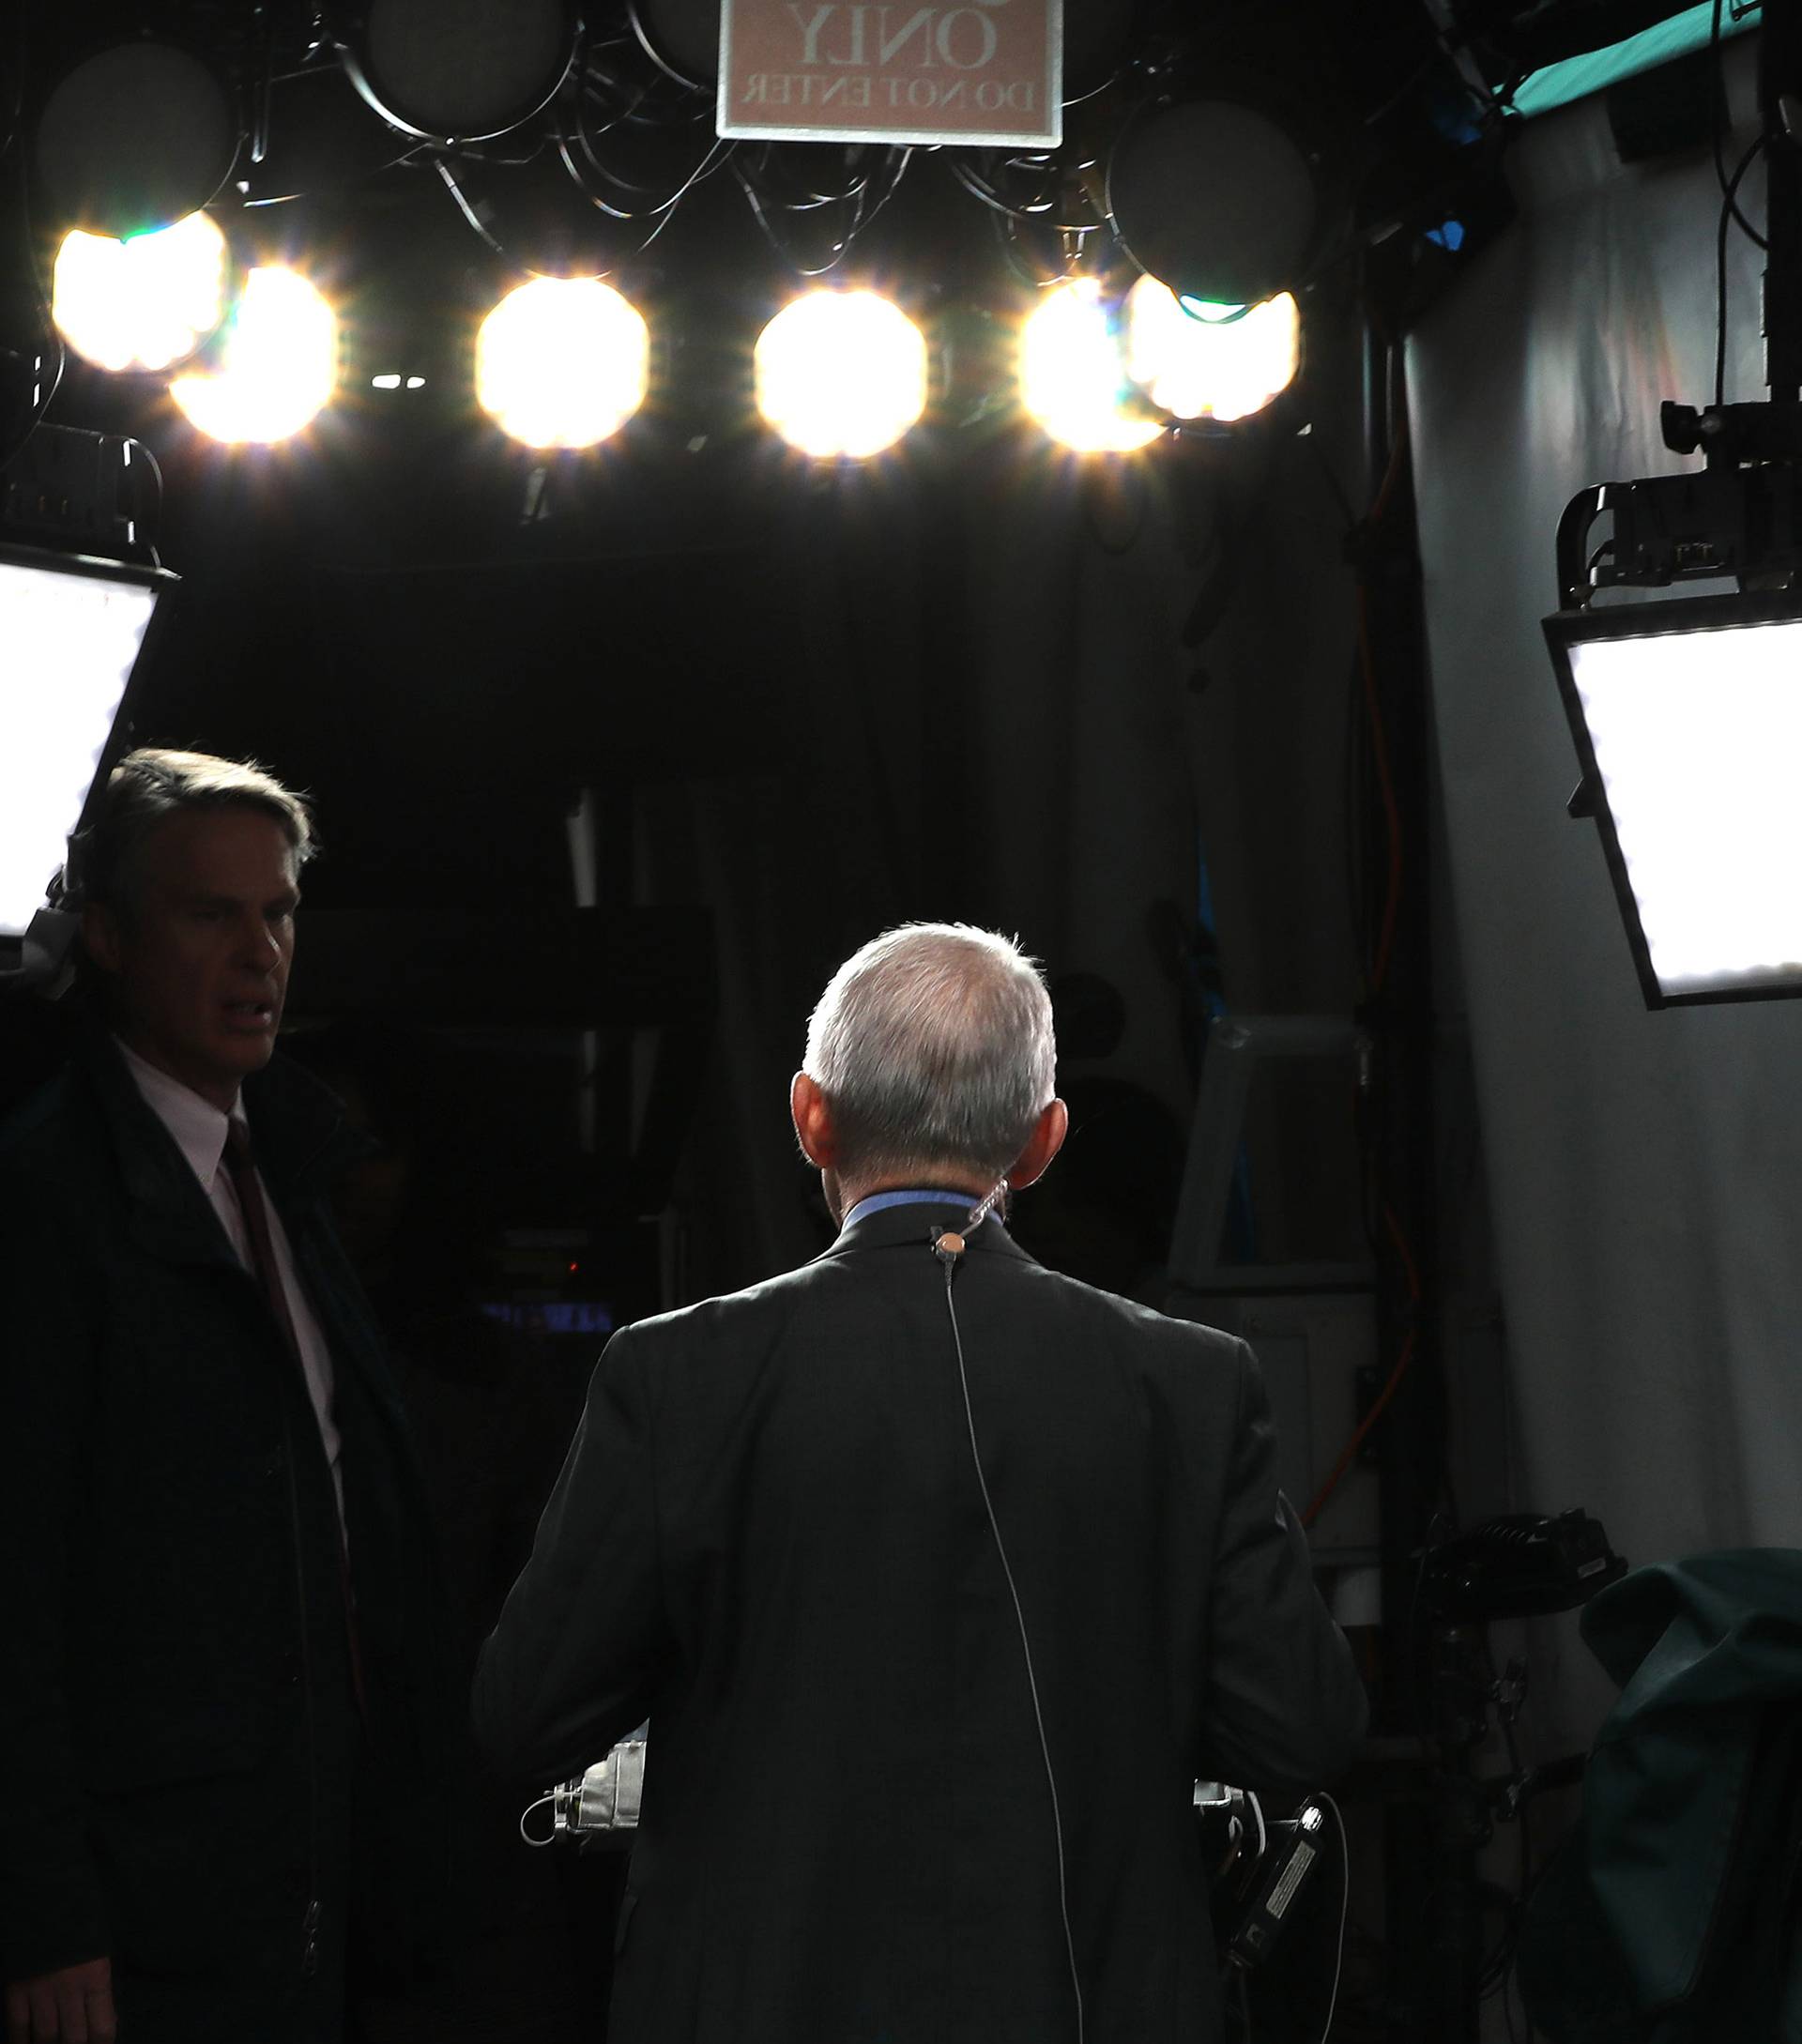 Dr. Anthony Fauci, then-director of the National Institute of Allergy and Infectious Diseases, is interviewed by CBS News about the Trump administration’s response to the global coronavirus outbreak outside the White House on March 12, 2020